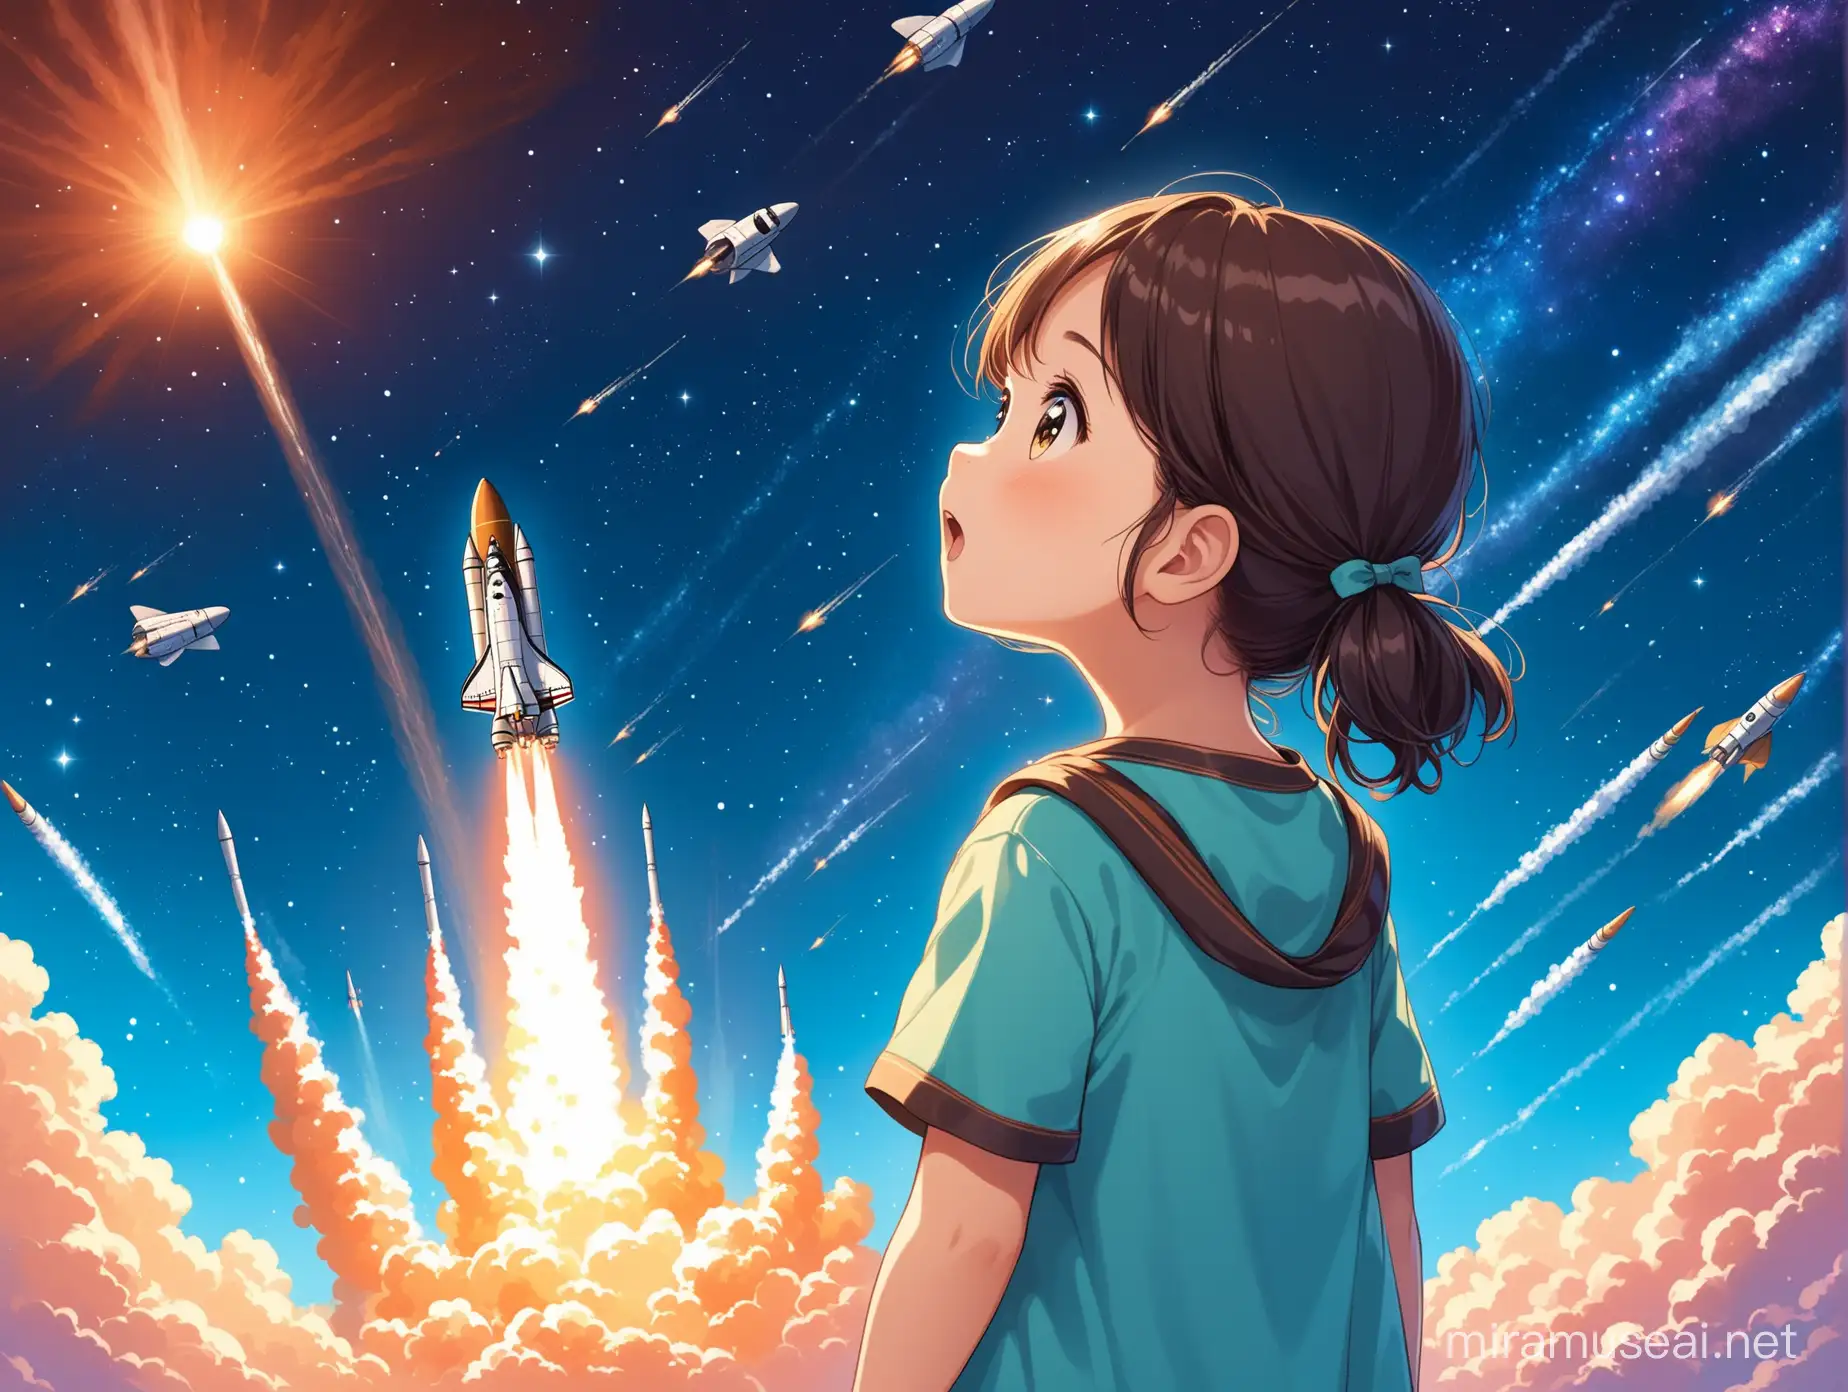 Adorable Girl Gazes at Spaceship Launch in Awe